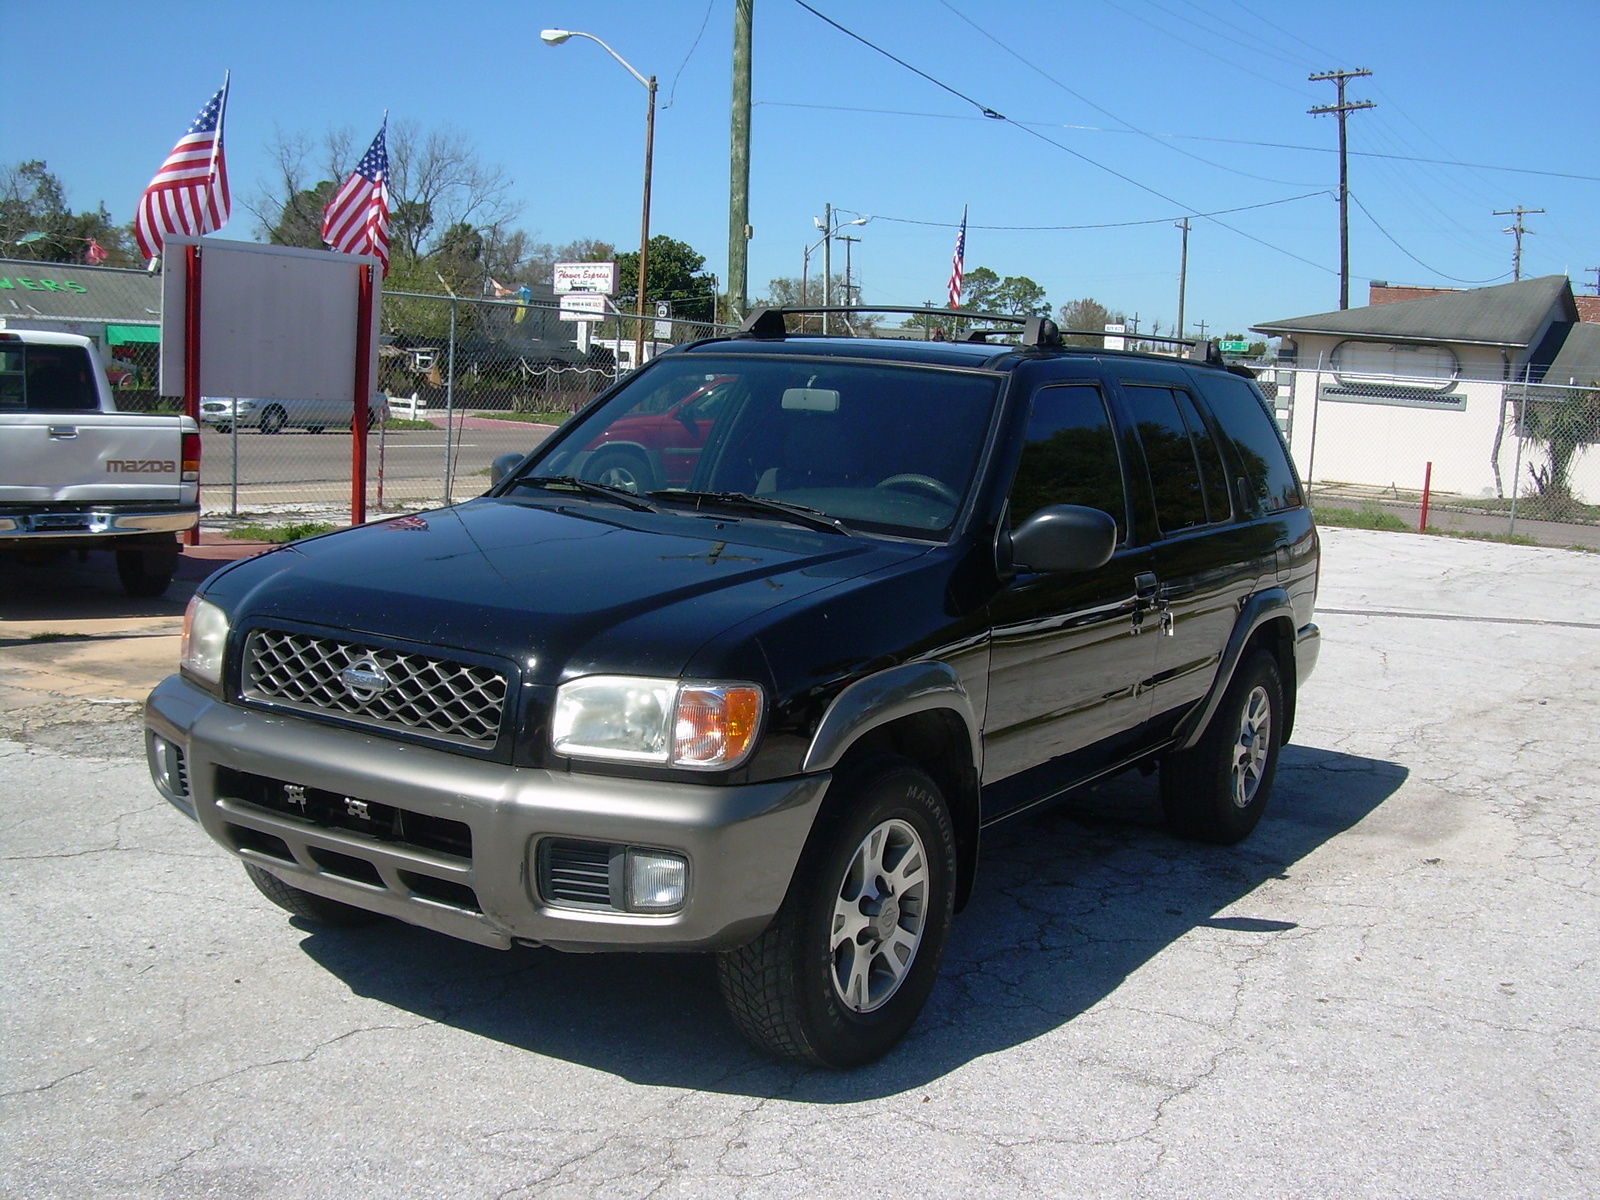 2001 Nissan pathfinder off road ability #3